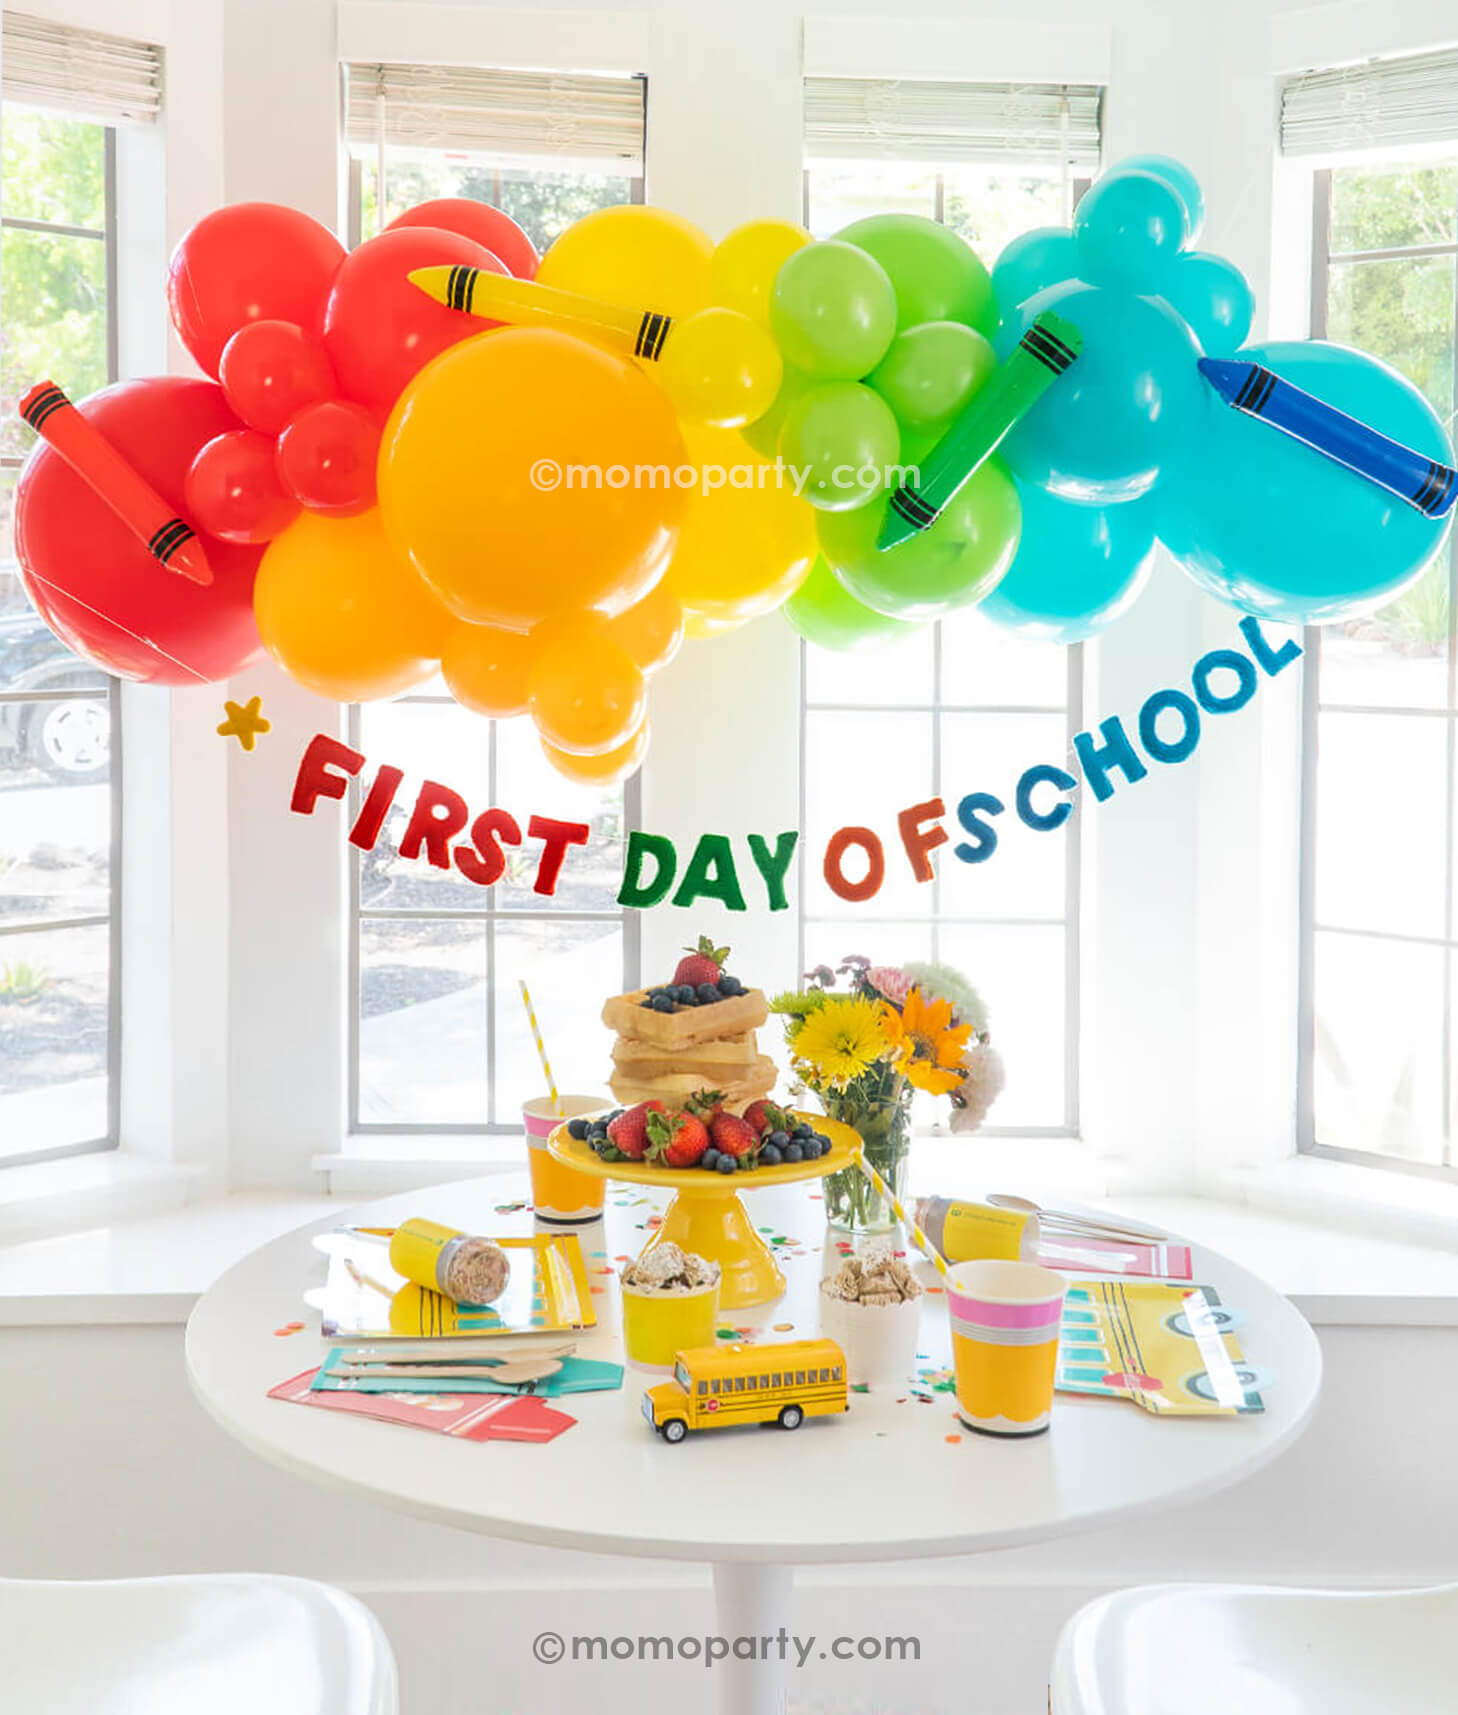 First Day of School Party Box